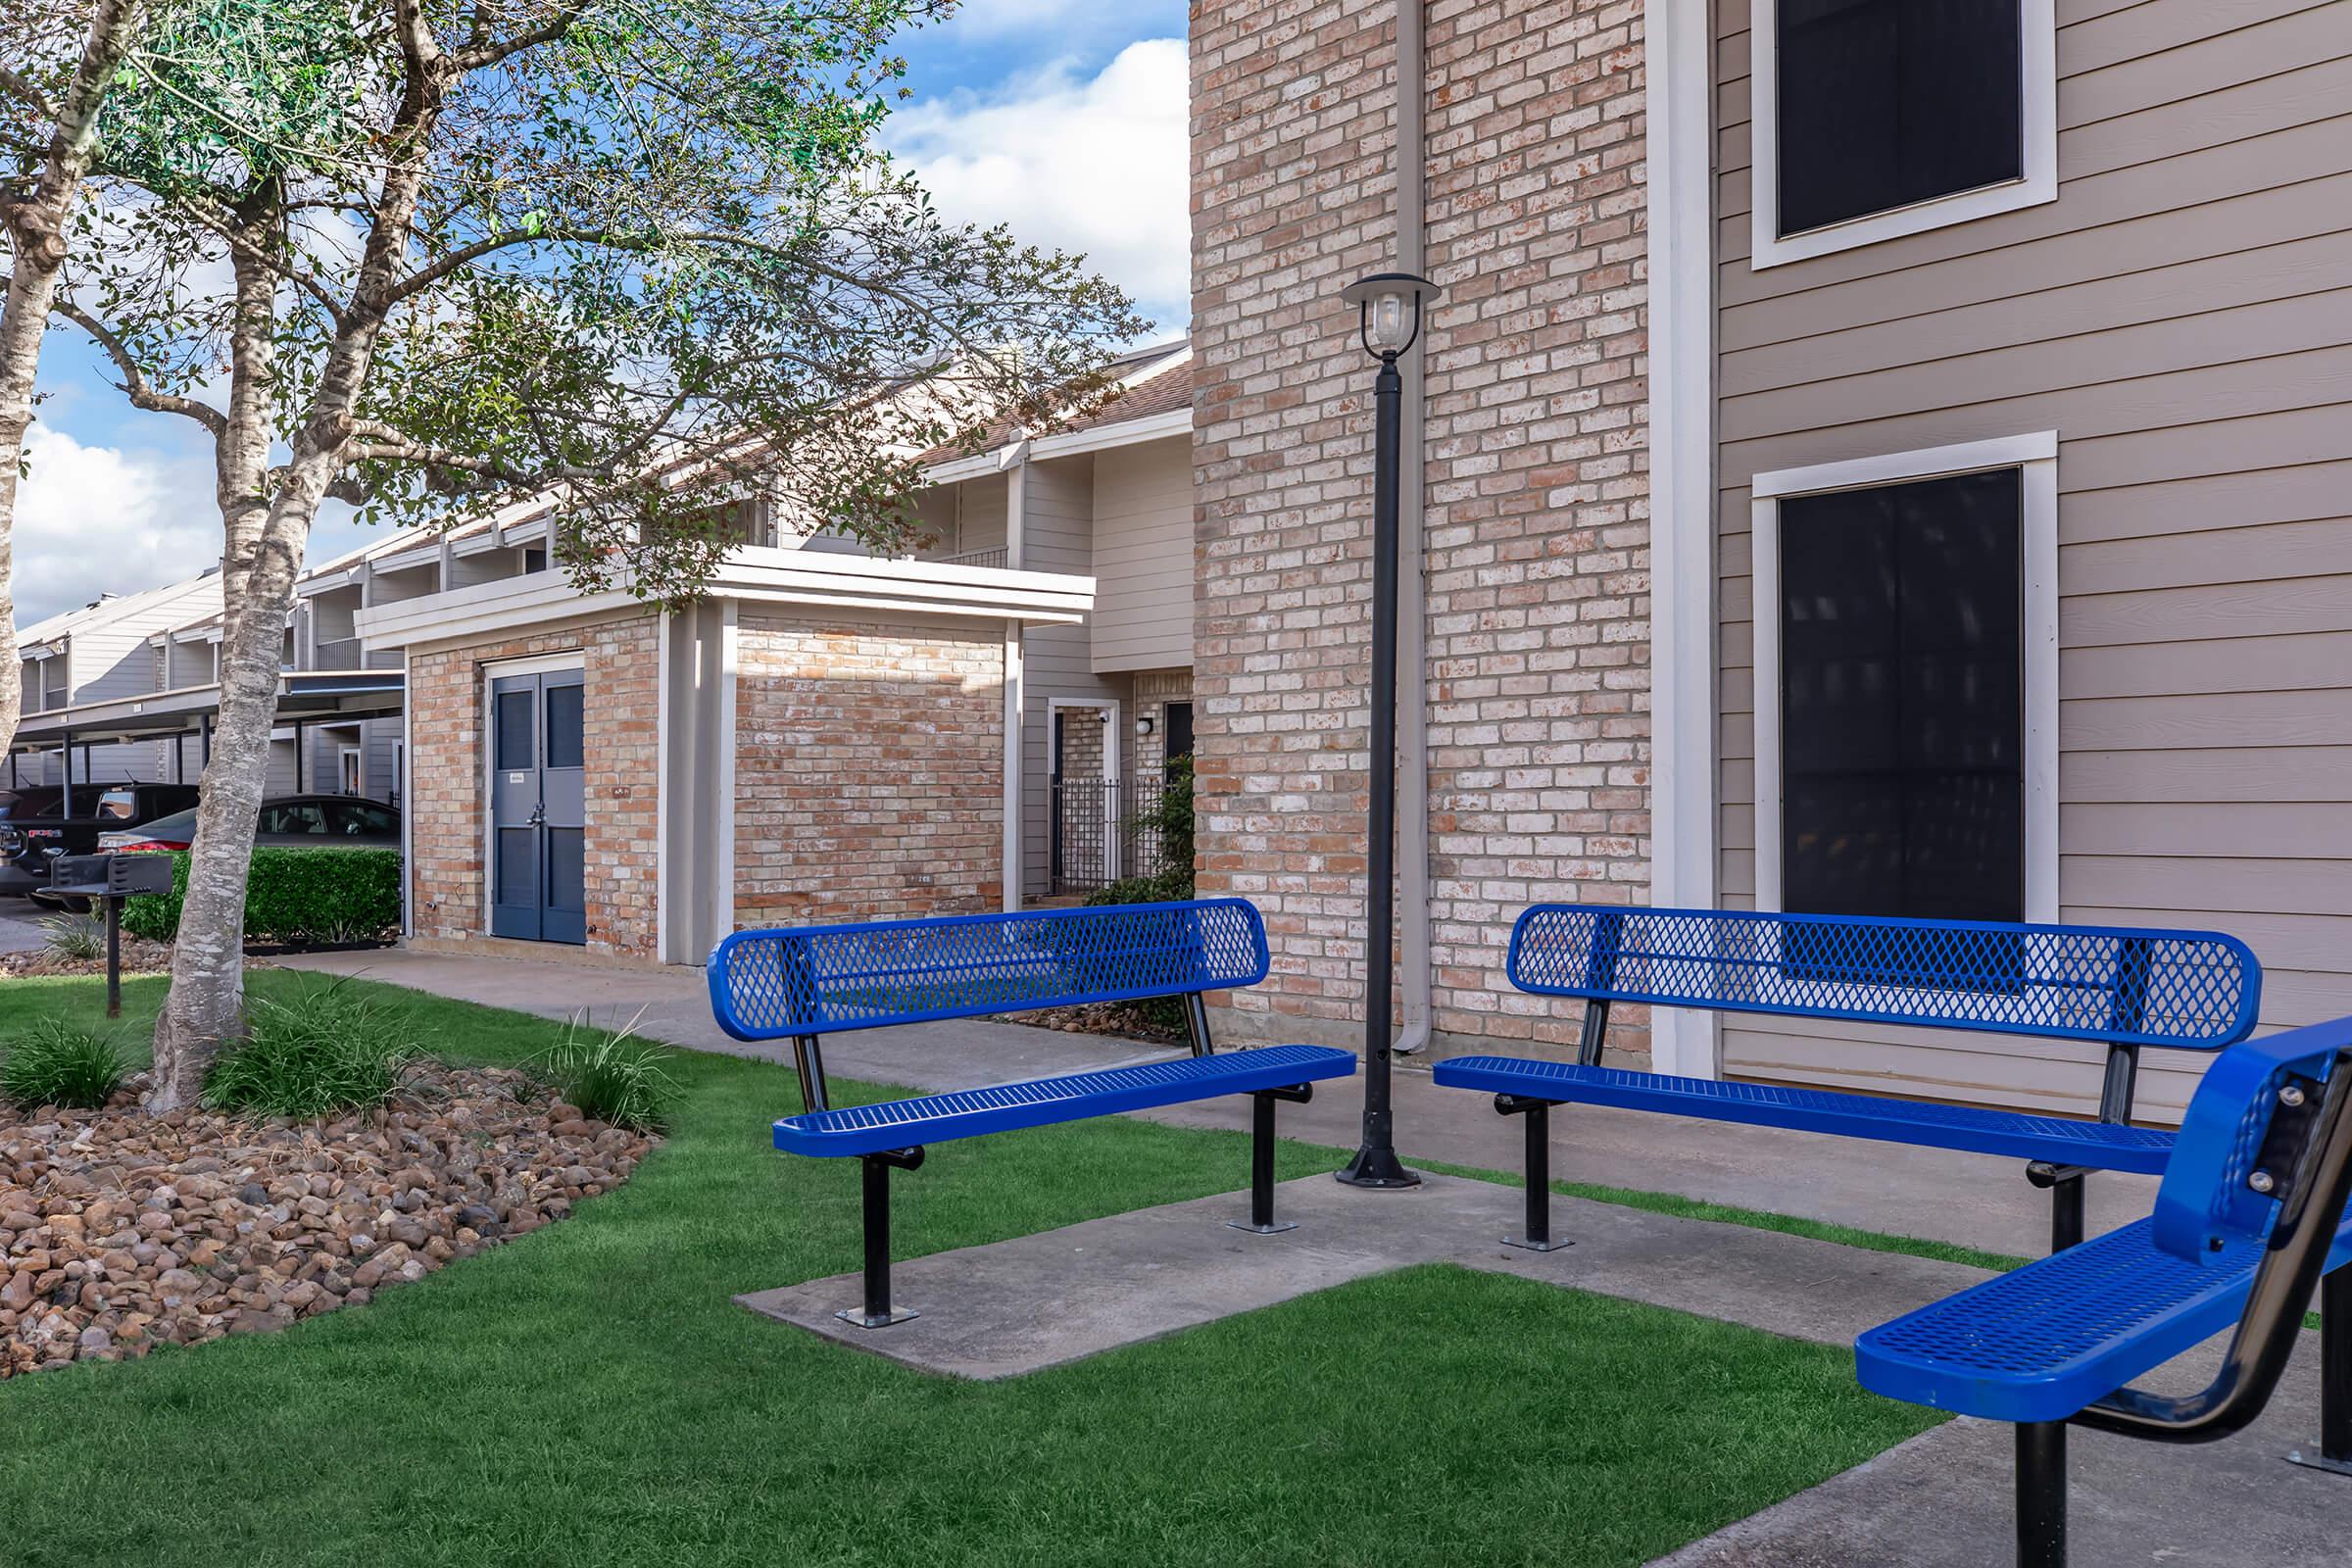 a blue bench in front of a brick building